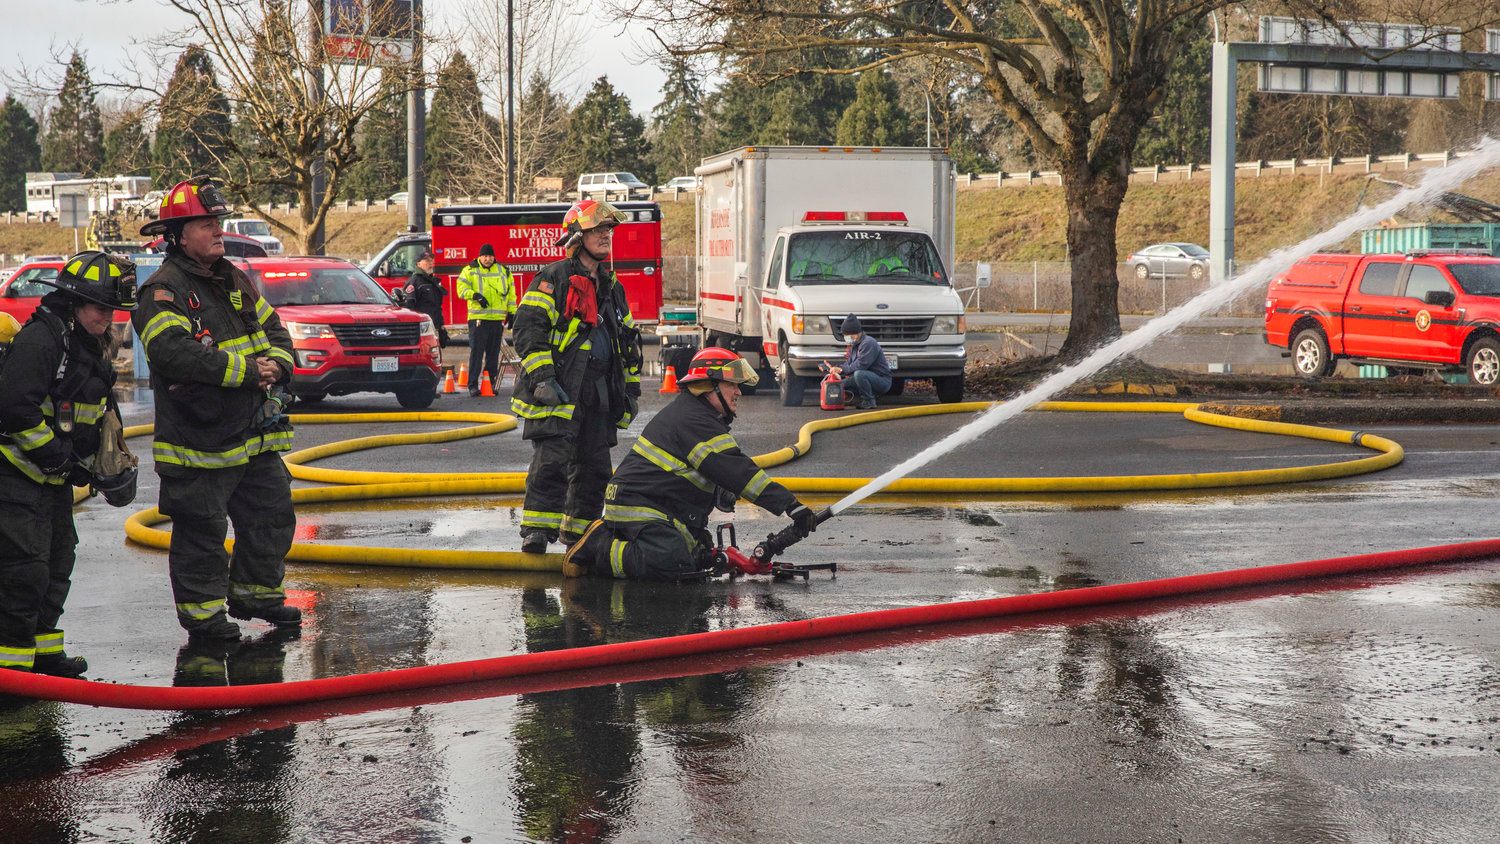 Crews from Riverside Fire Authority work to put out flames inside the former location of Papa Pete’s and Shari’s Cafe in Centralia on Sunday.